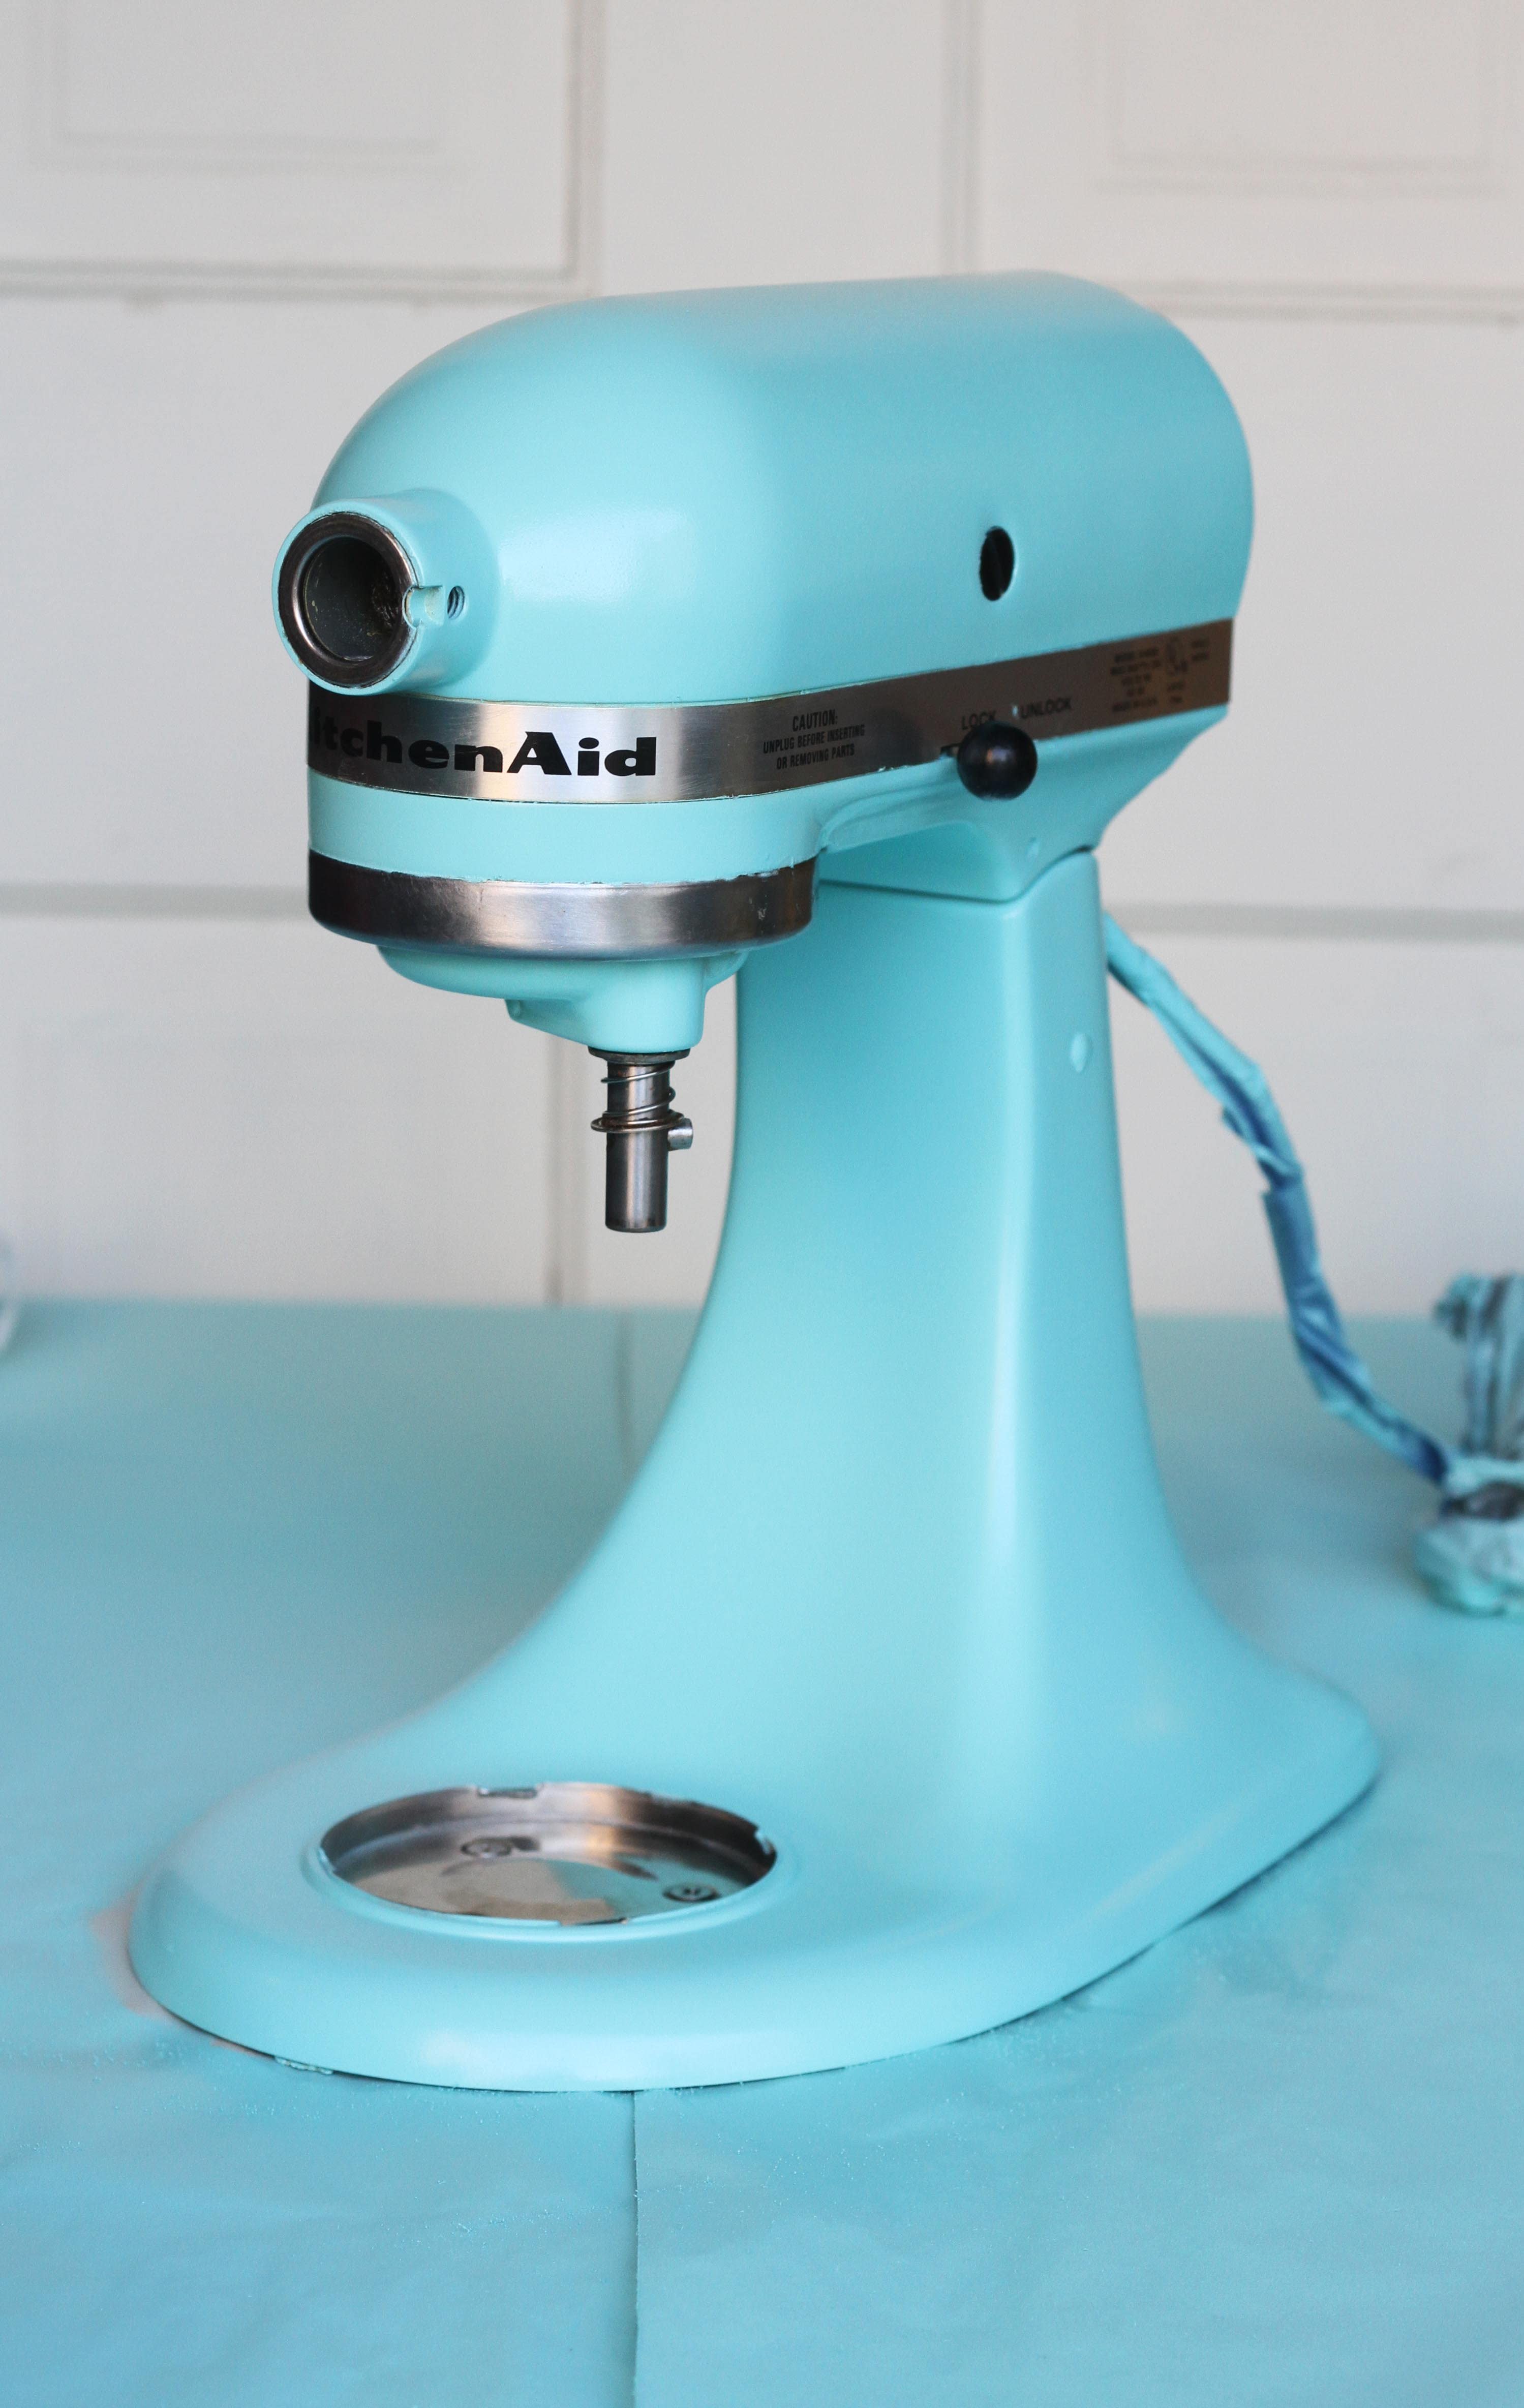 How to paint your Kitchenaid mixer! – oh yay studio – Color + Painting +  Making + Everyday celebrating